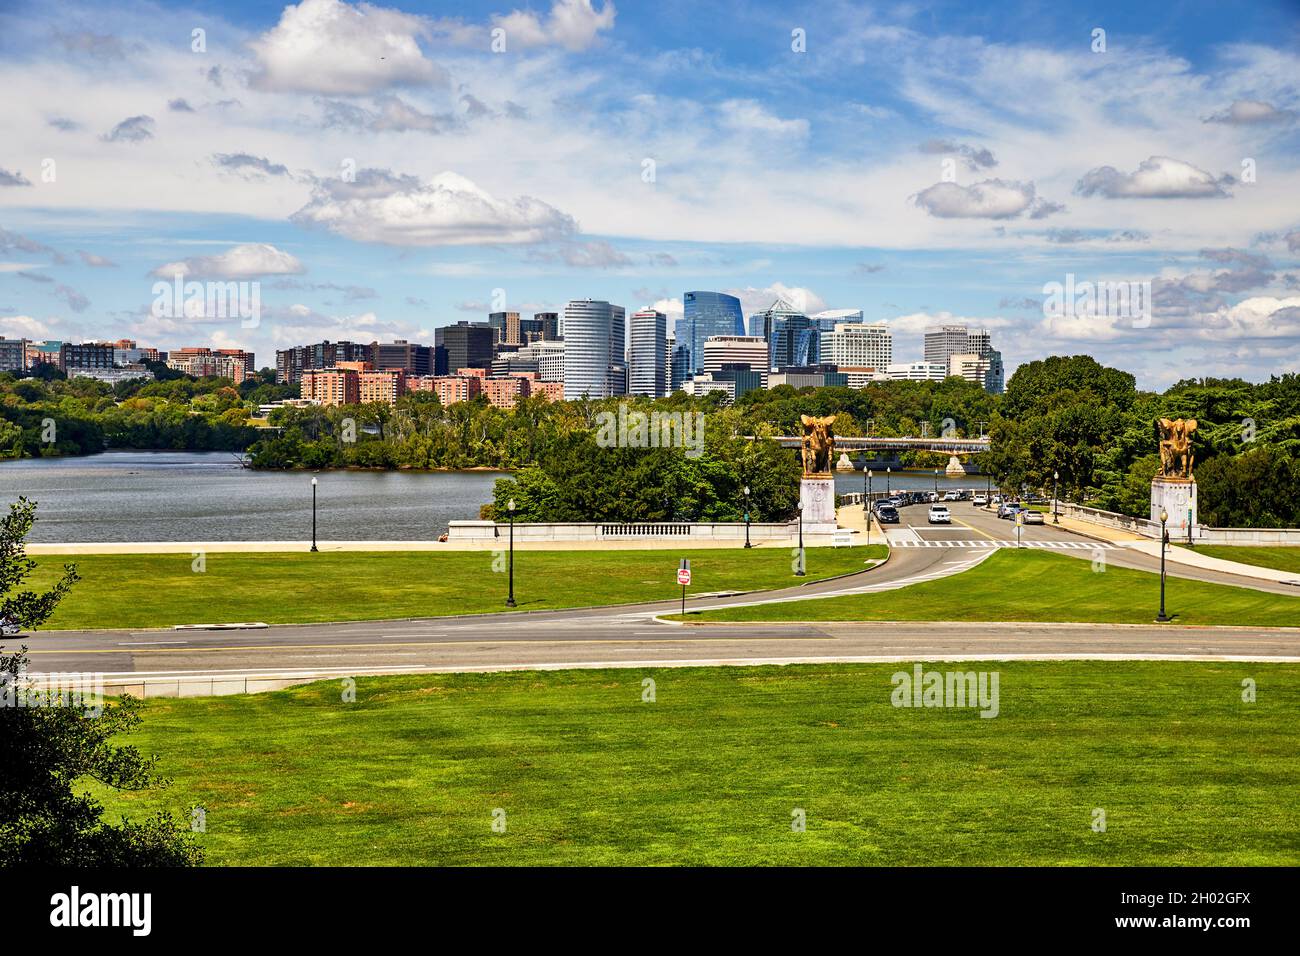 Skyline view of Rosslyn, Virginia taken from Washington DC side of the Potomac River Stock Photo